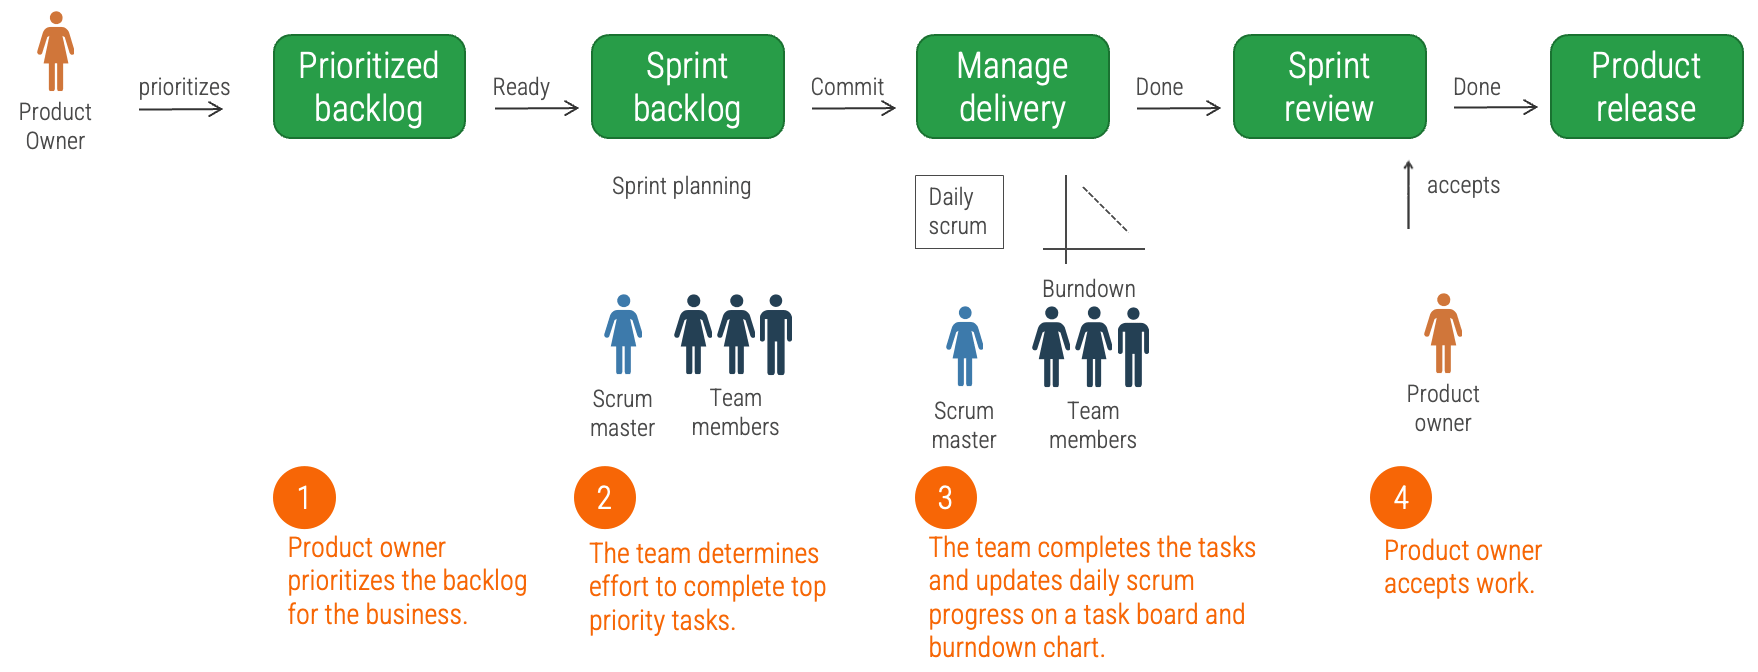 Prioritized Backlog, Sprint Backlog, Manage Delivery, Sprint Review, Product Release